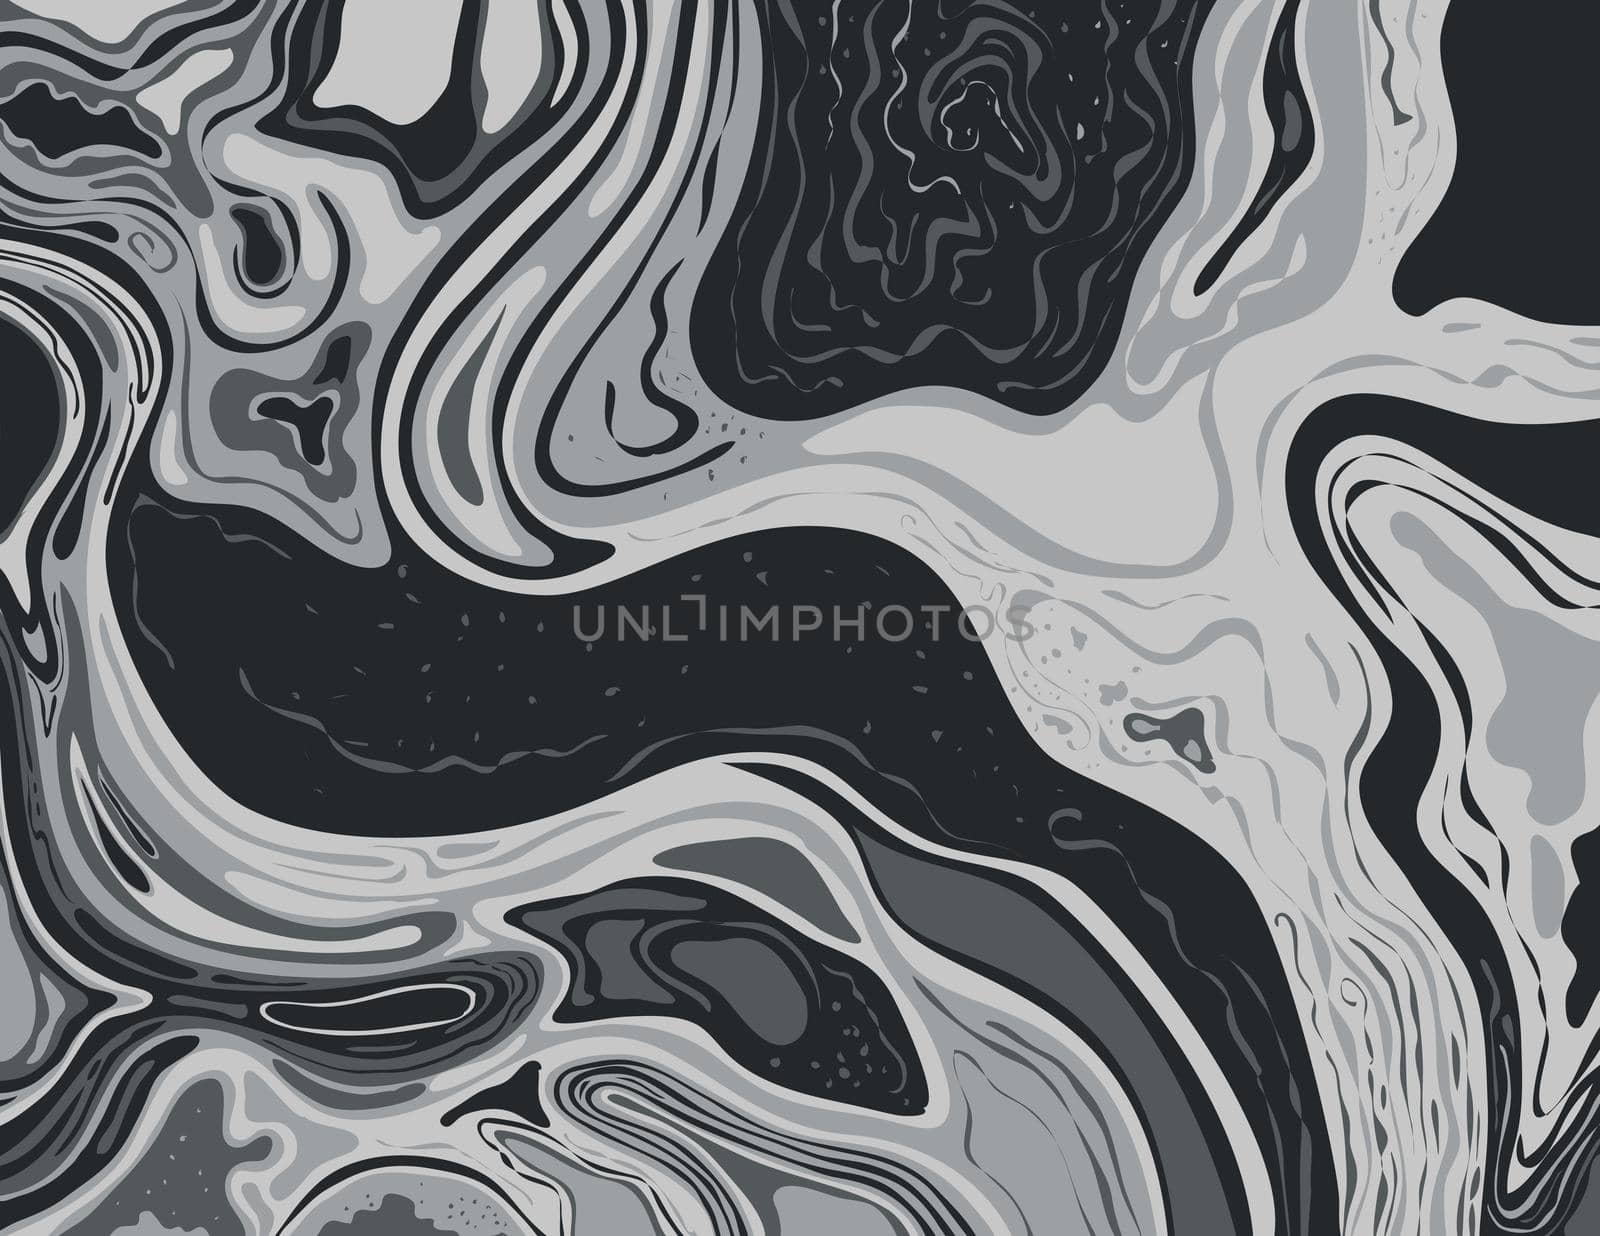 Digital marbling or inkscape illustration of an abstract swirling,psychedelic, liquid marble and simulated marbling in the style of Suminagashi Kintsugi marbled effect in Grayscale and Gray Monochrome color
